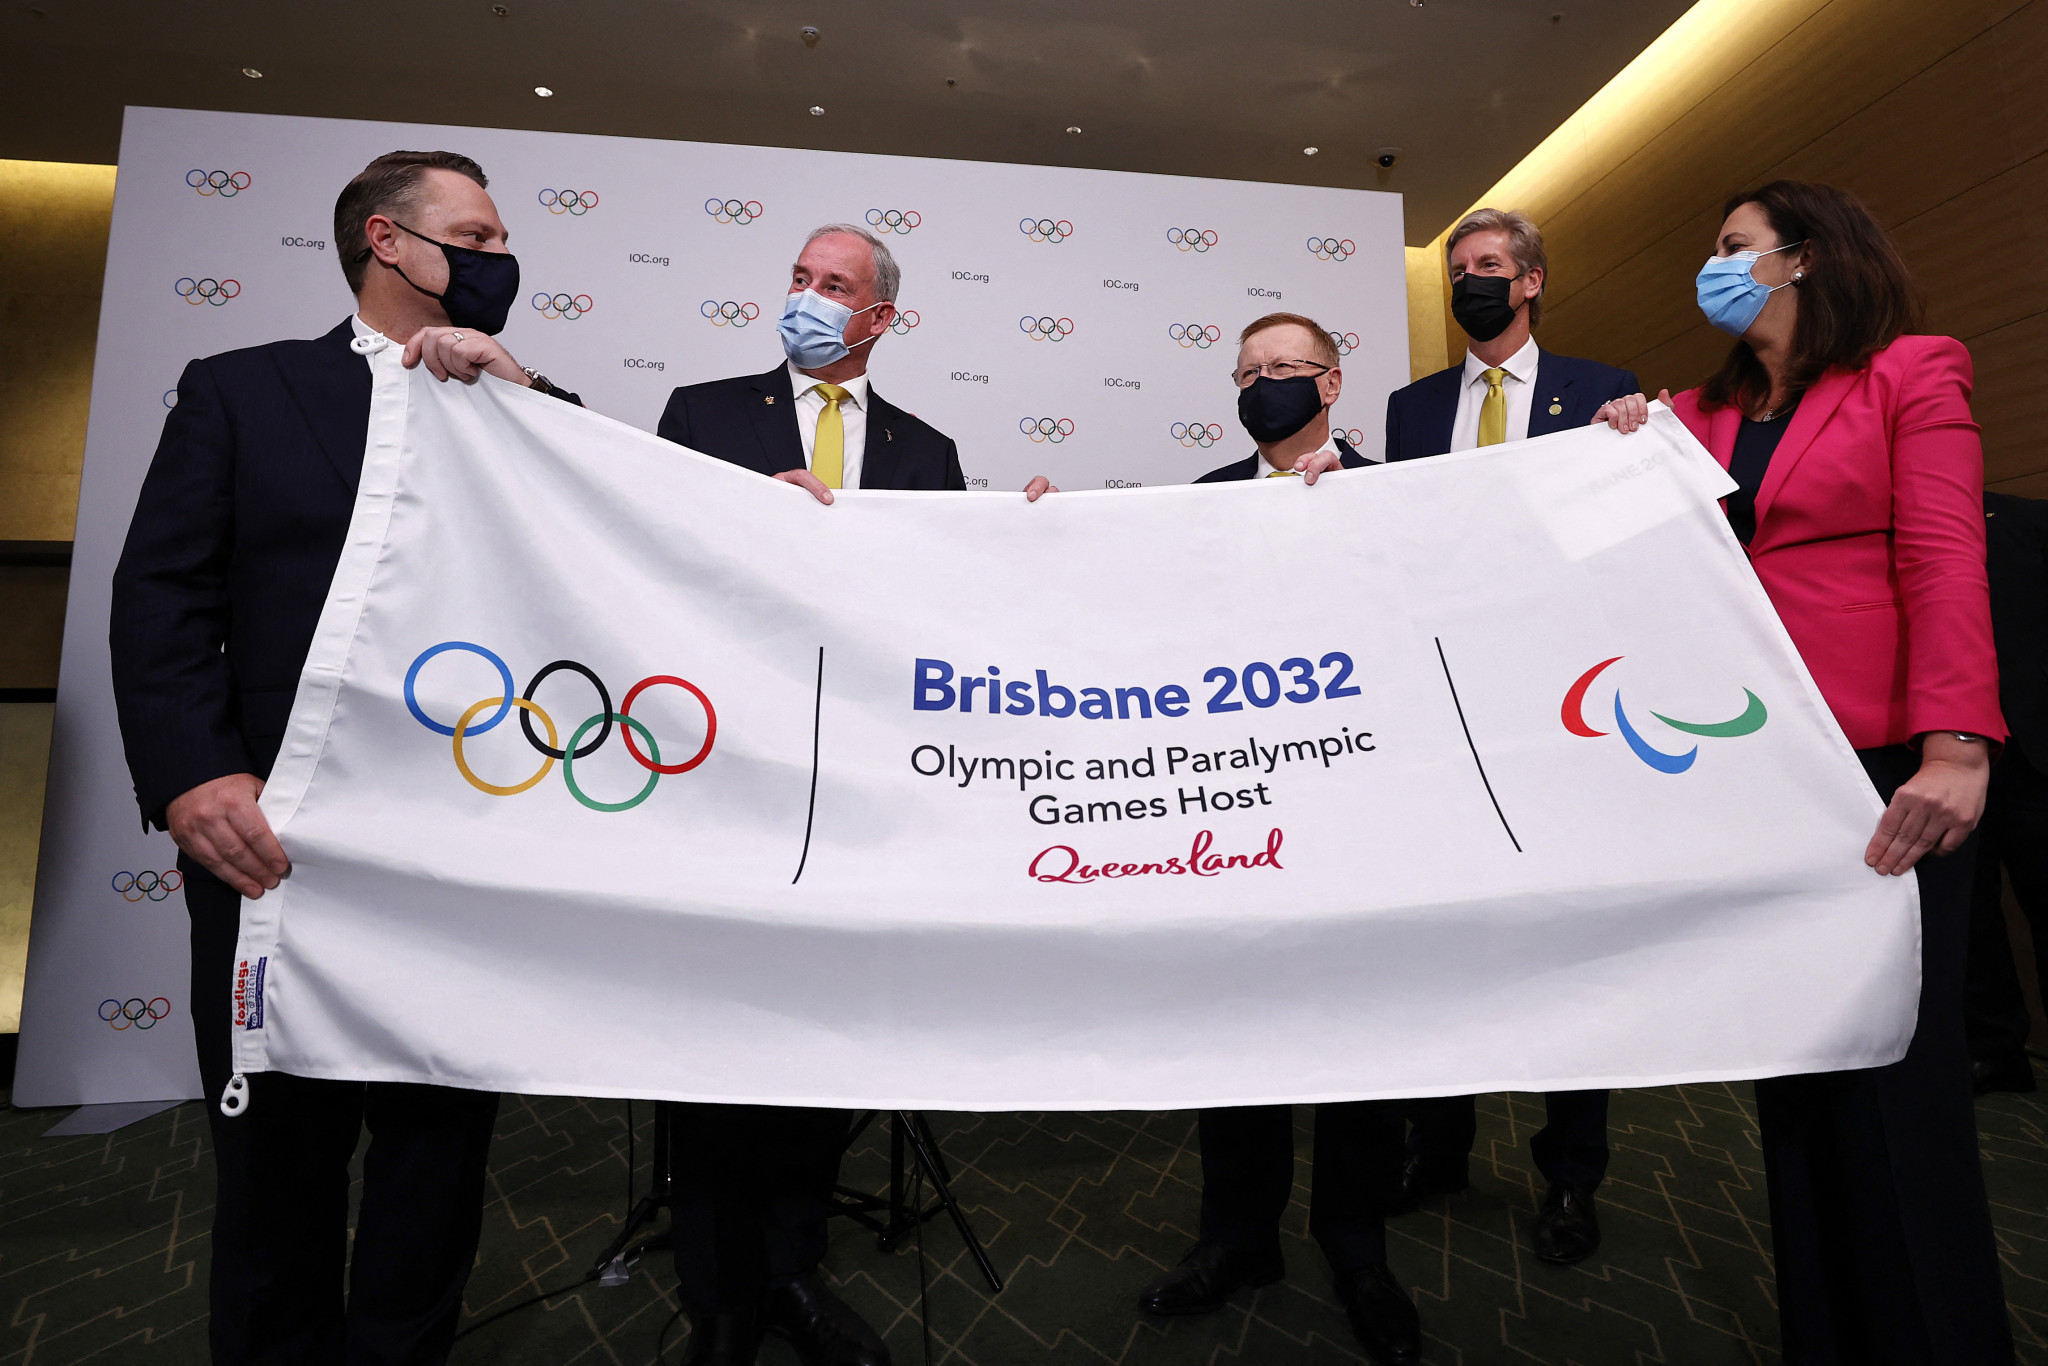 Brisbane was awarded the 2032 Olympic and Paralympic Games last year ©Getty Images